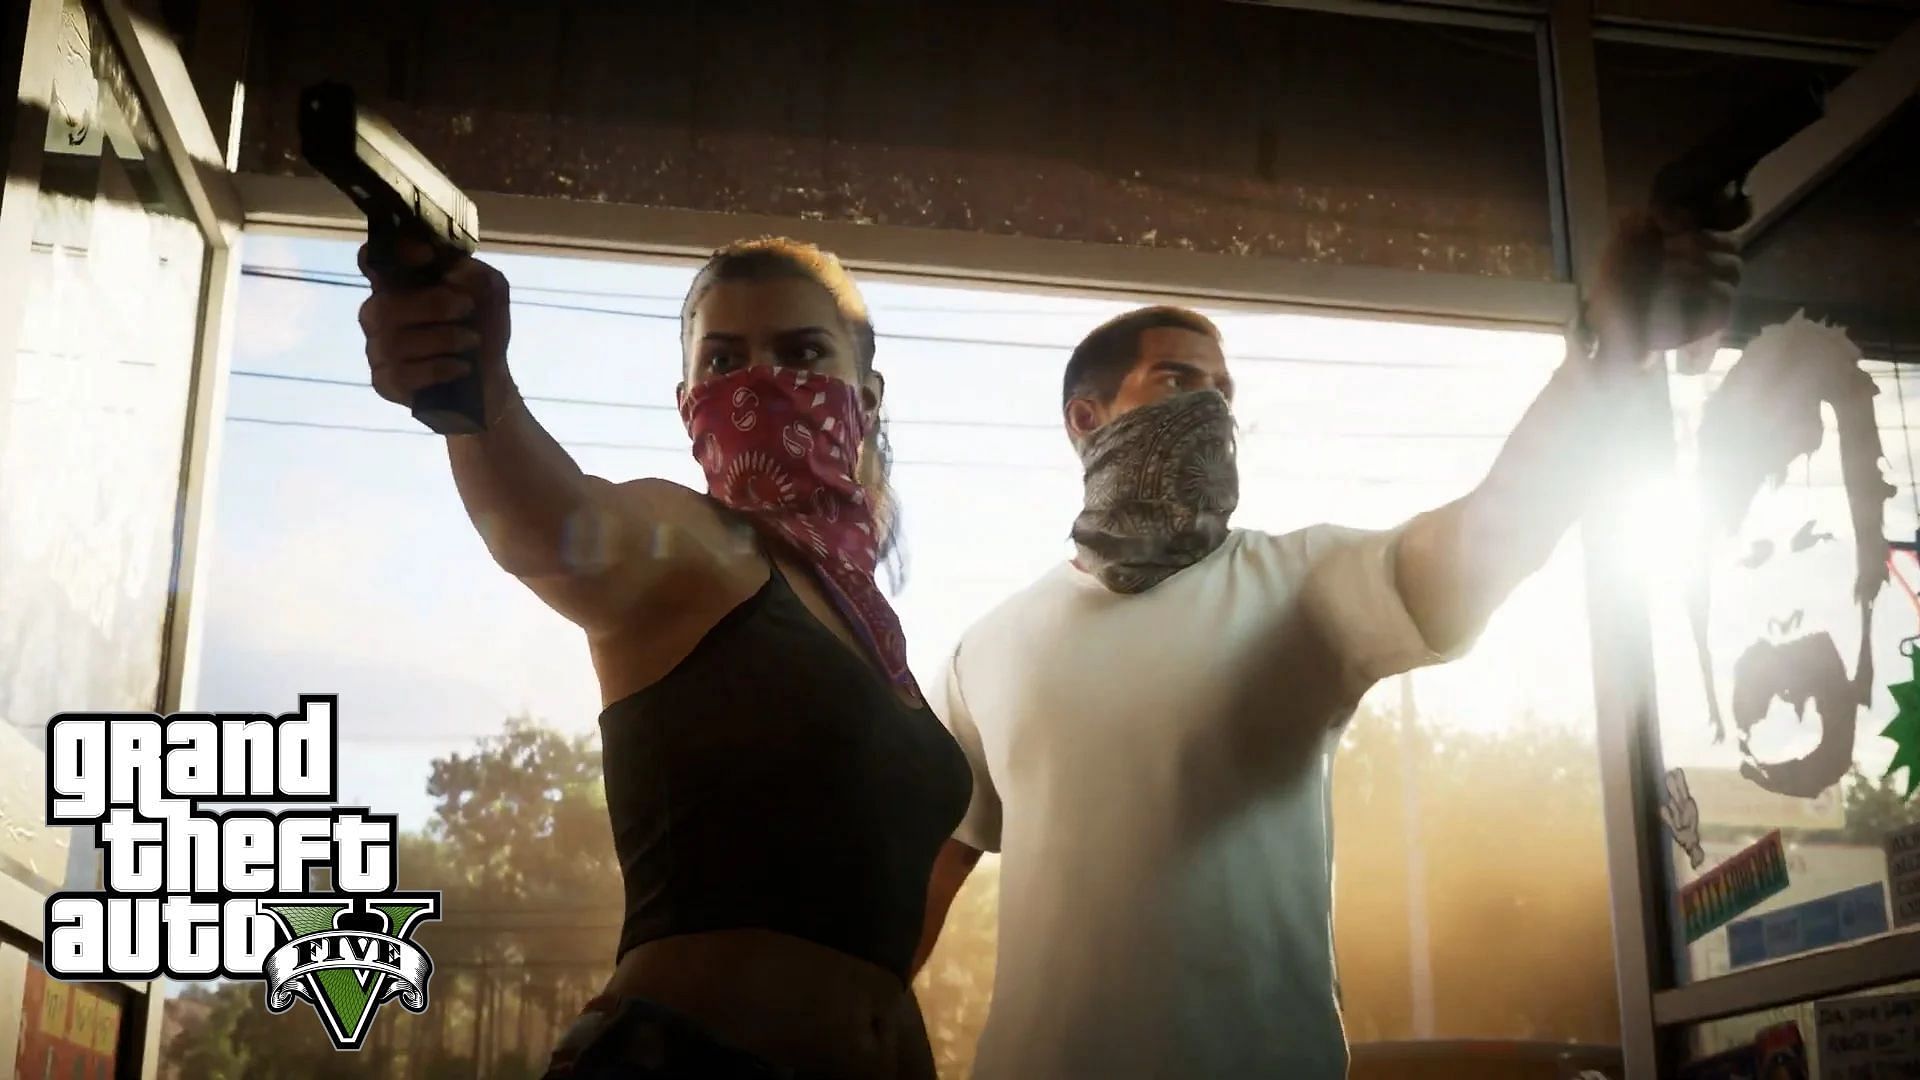 Jason and Lucia in GTA 5